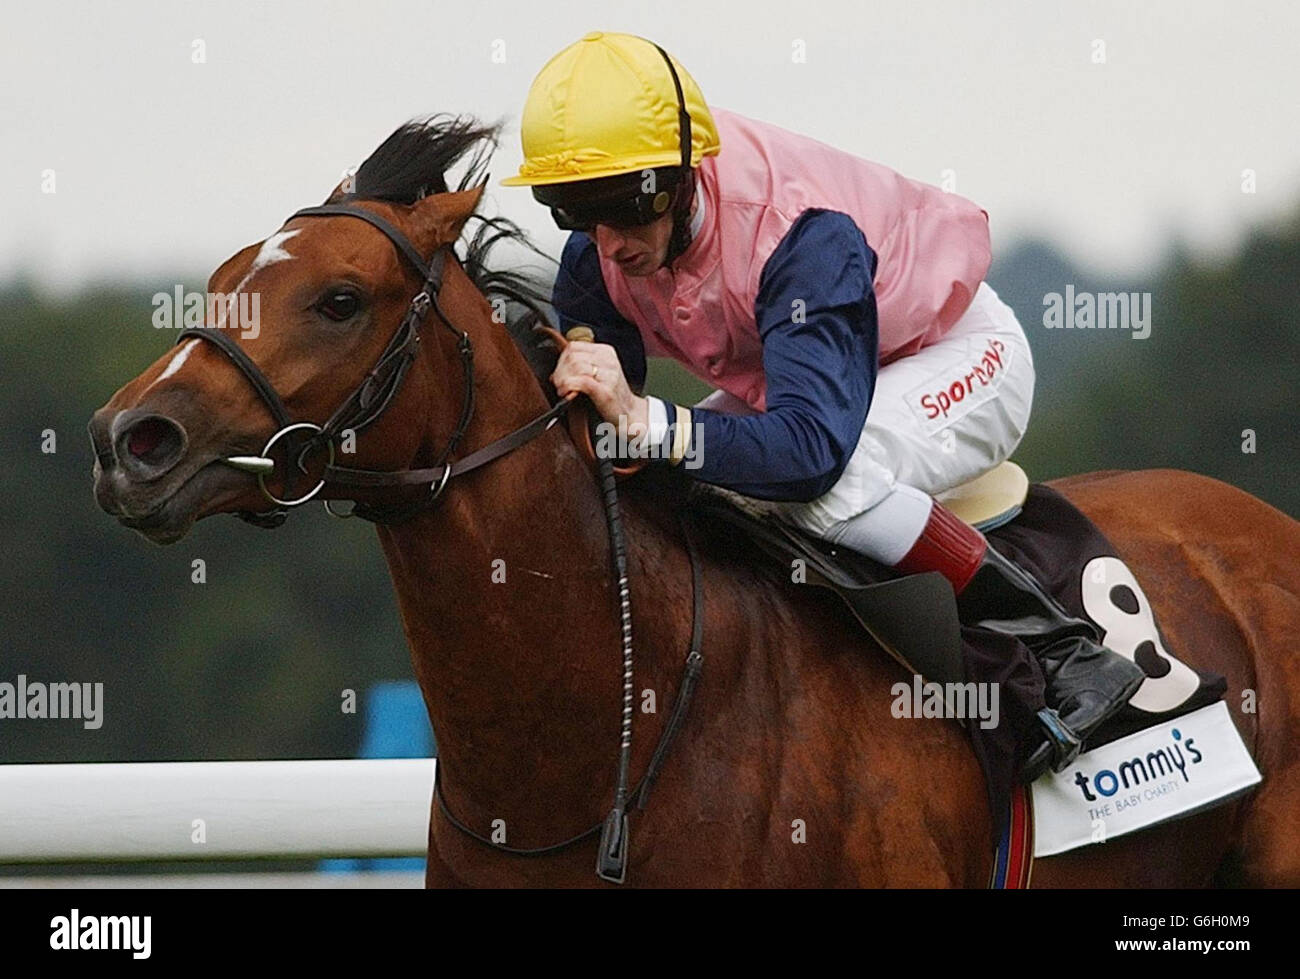 High Accolade, ridden by Martin Dwyer wins The Tommy's (The Baby Charity) Cumberland Lodge Stakes at Ascot. Stock Photo